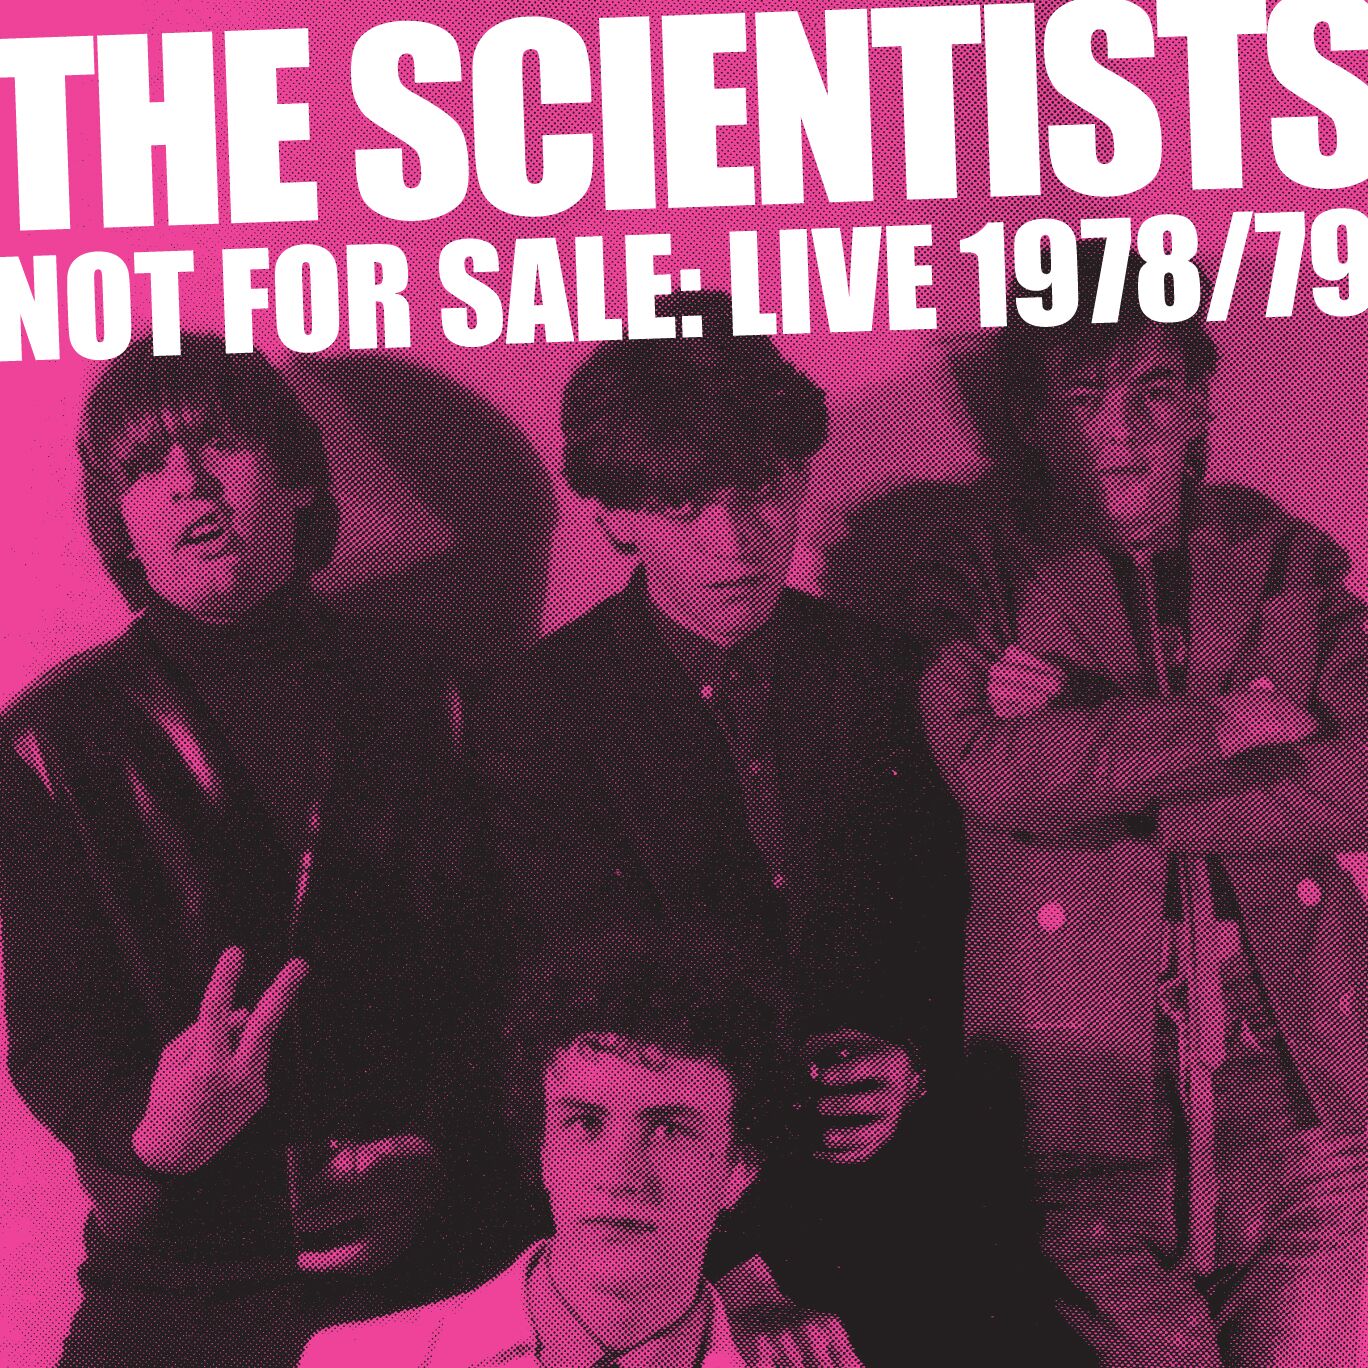 THE SCIENTISTS: 'Not For Sale' Live "78 / "79 - (2LP PINK VINYL / CD)